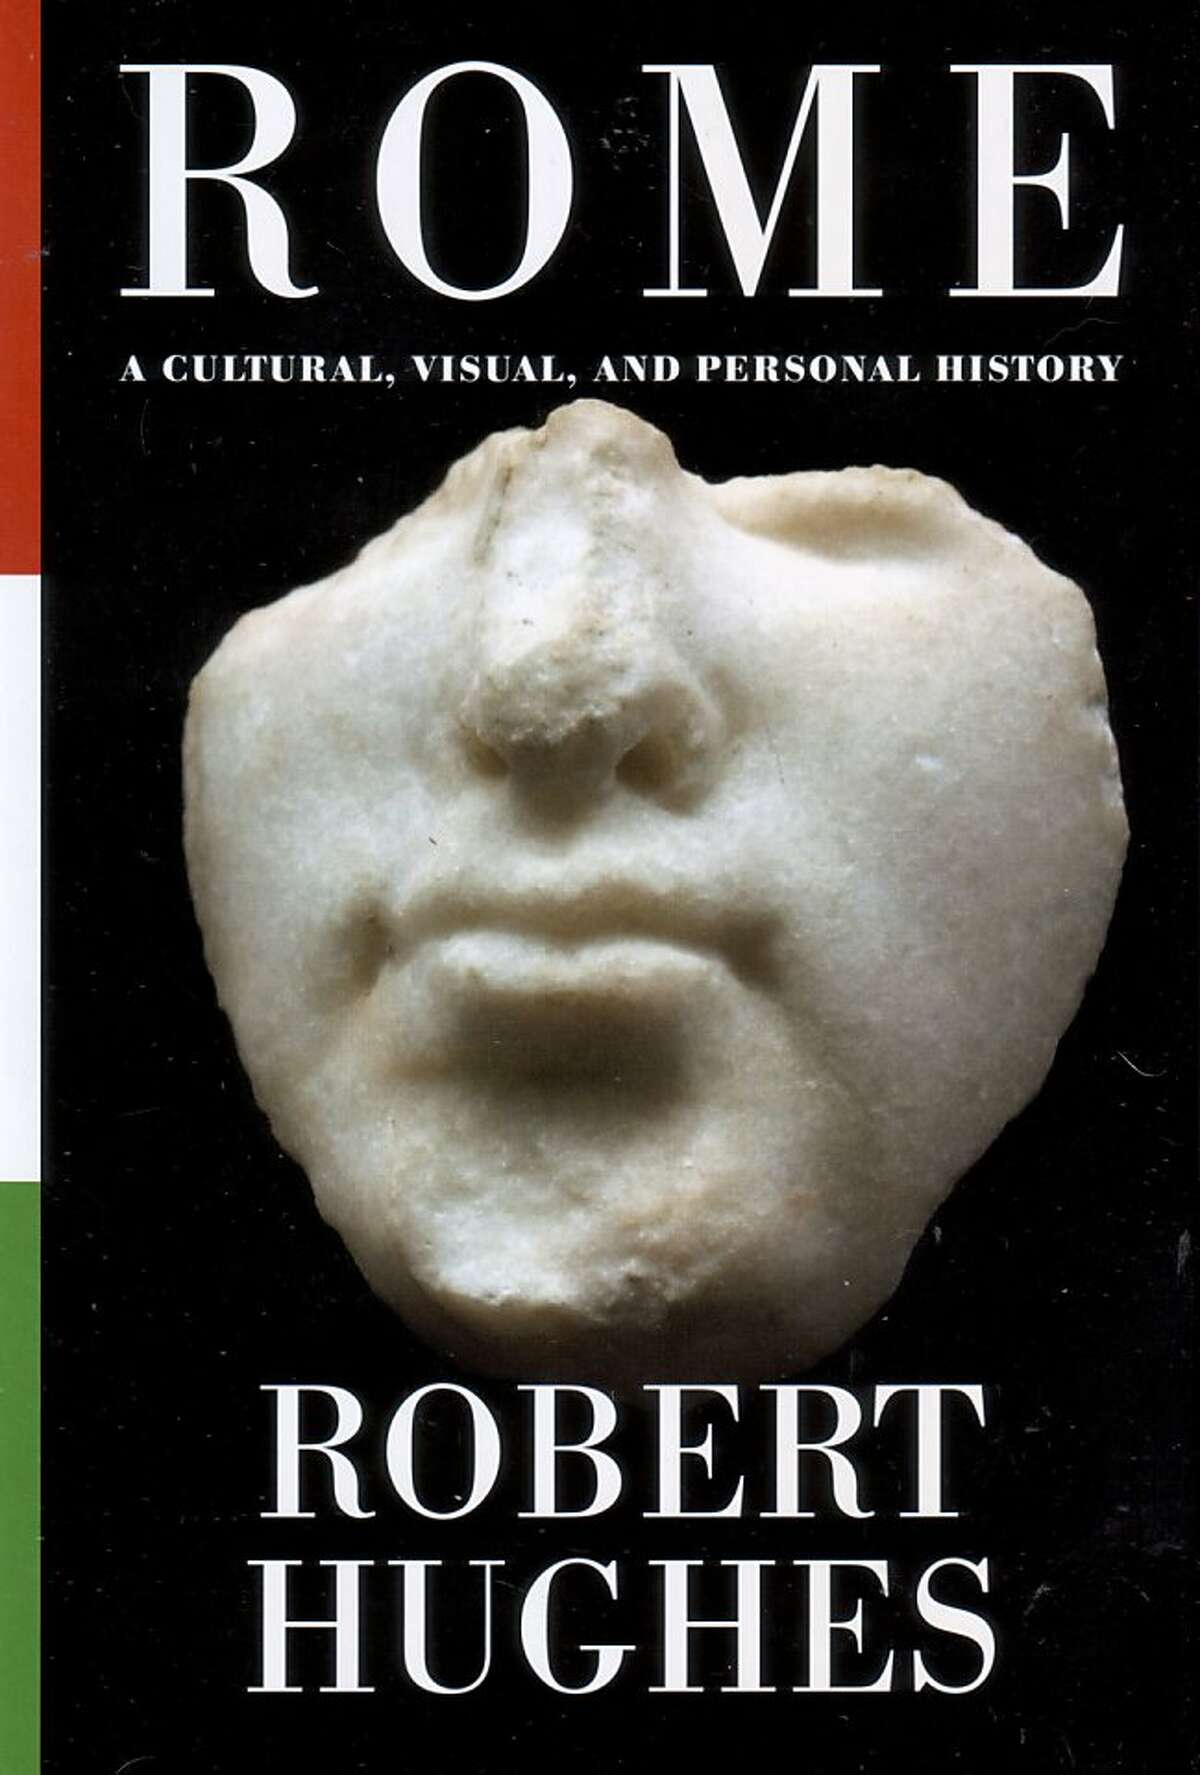 "Rome: A Cultural, Visual, and Personal History" By Robert Hughes